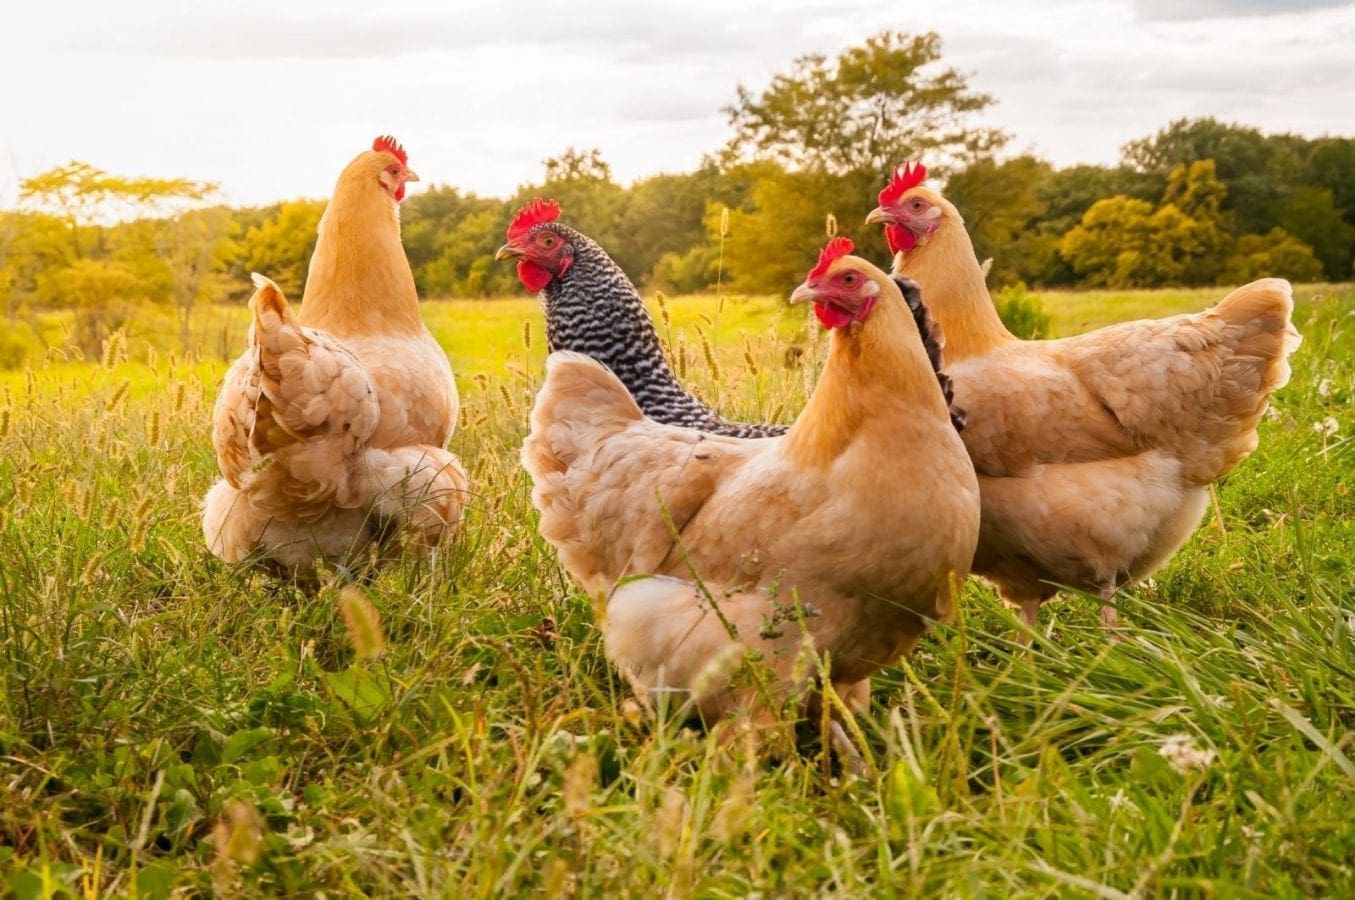 Symrise creates chicken solutions that meet the rising demand for ethical food and drinks